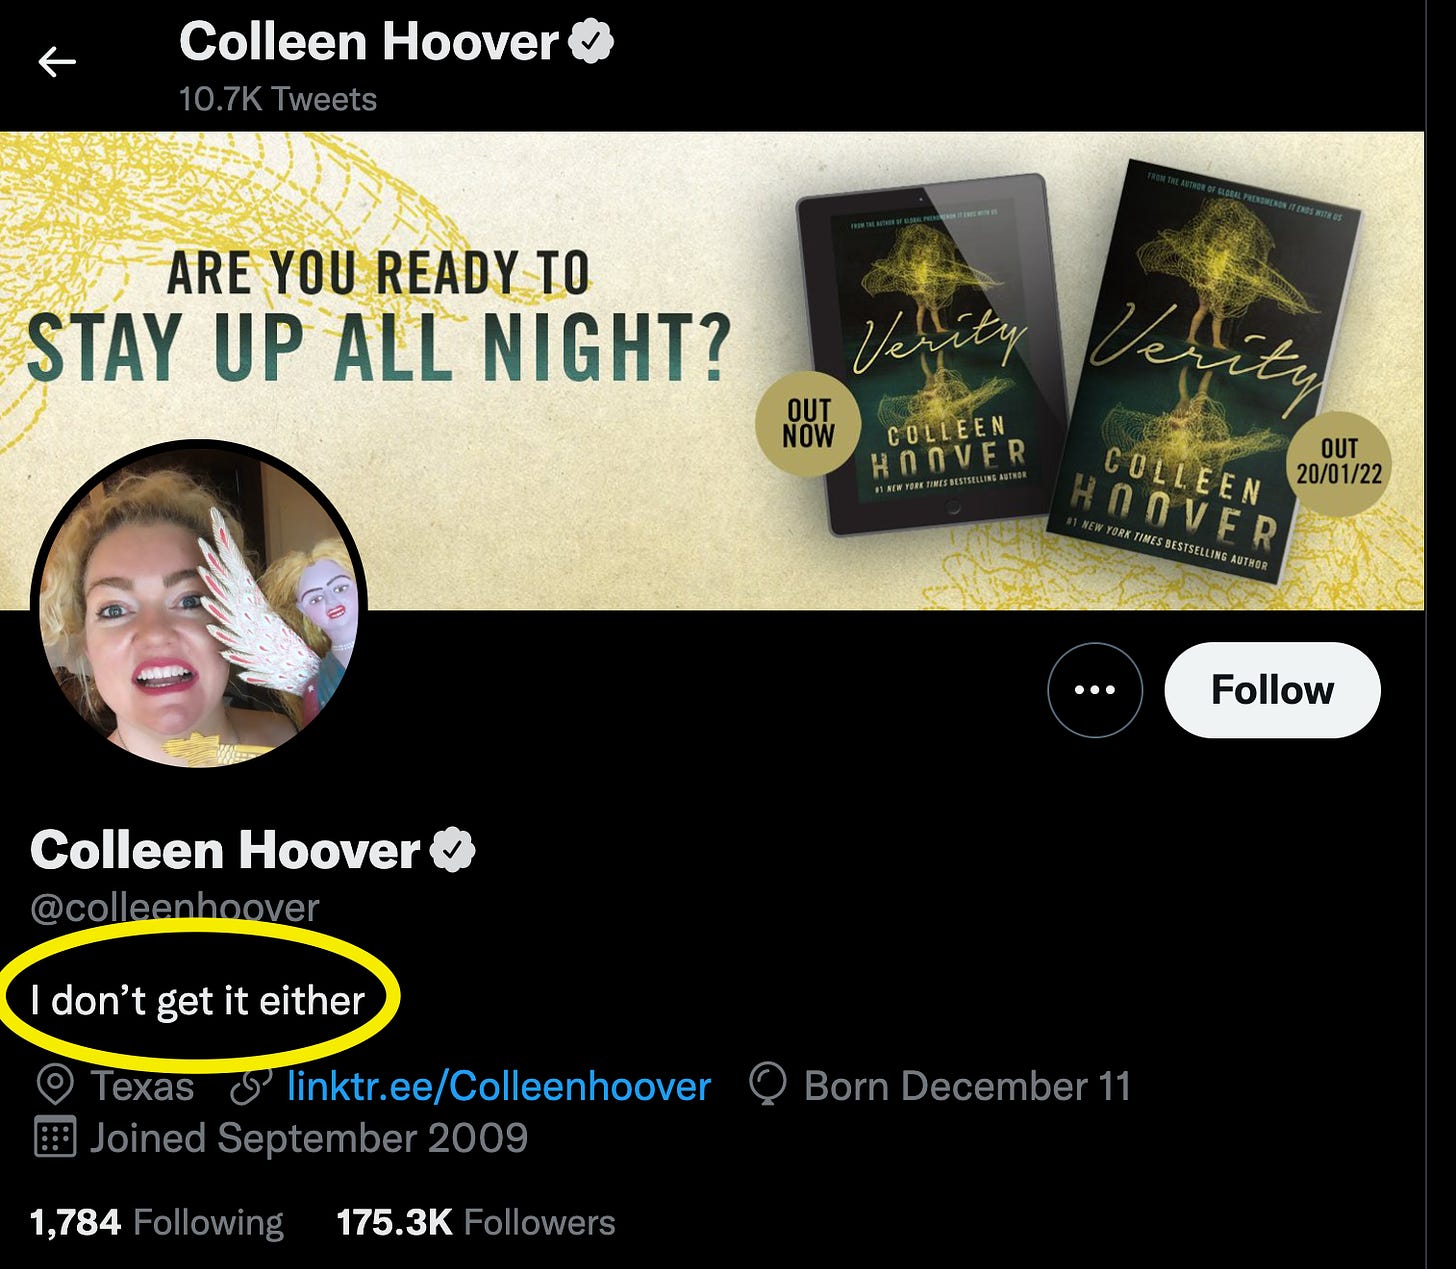 Never seen anything like it': how Colleen Hoover's normcore